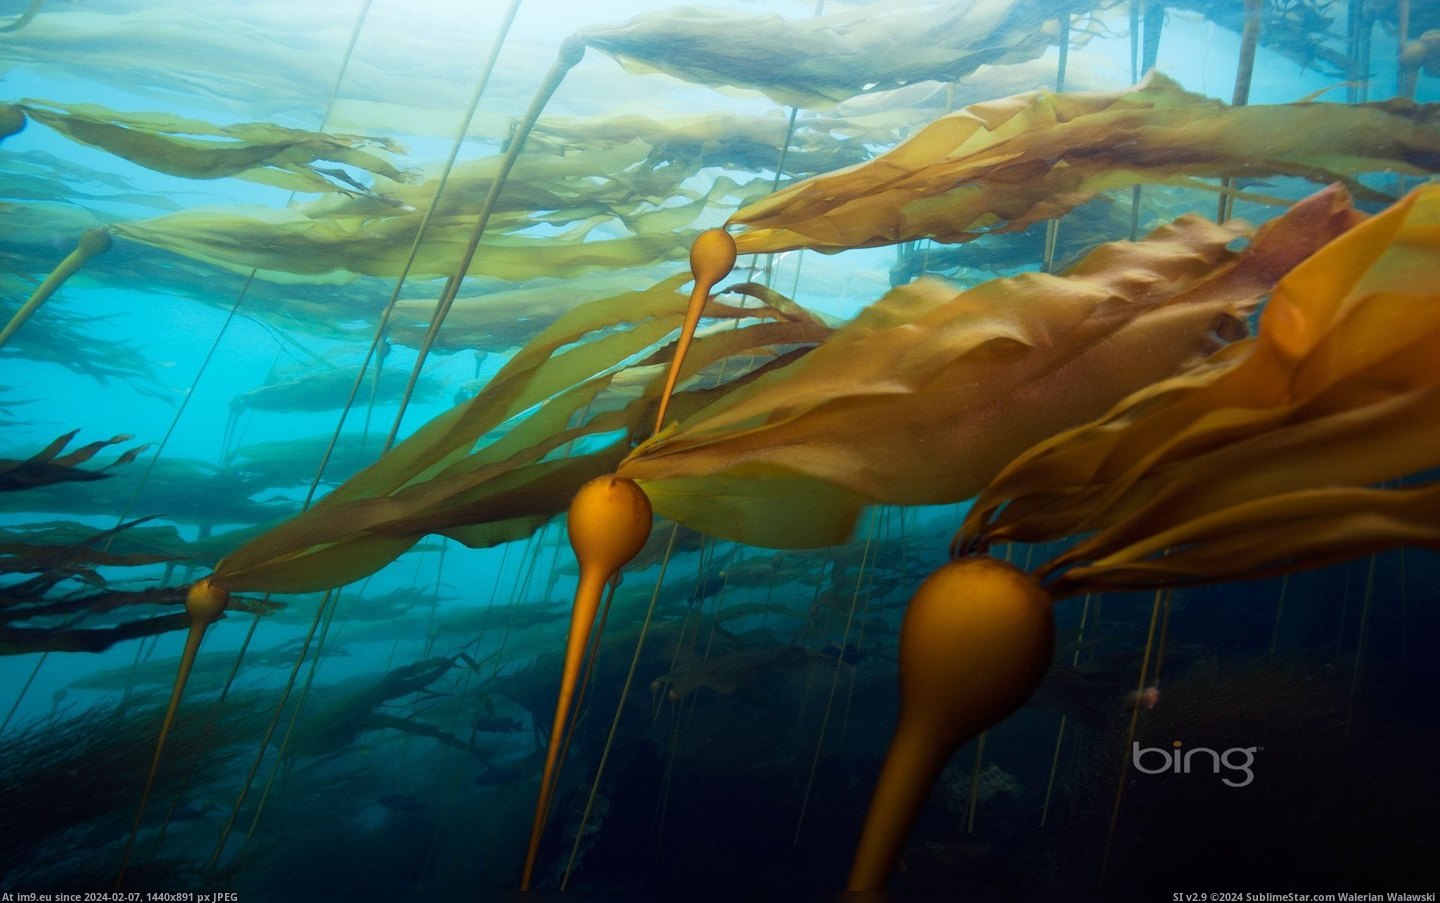 A bull kelp forest Hussar Point, Browning Pass, British Columbia, Canada (Getty Images) 2013-03-15 (in Best photos of March 2013)